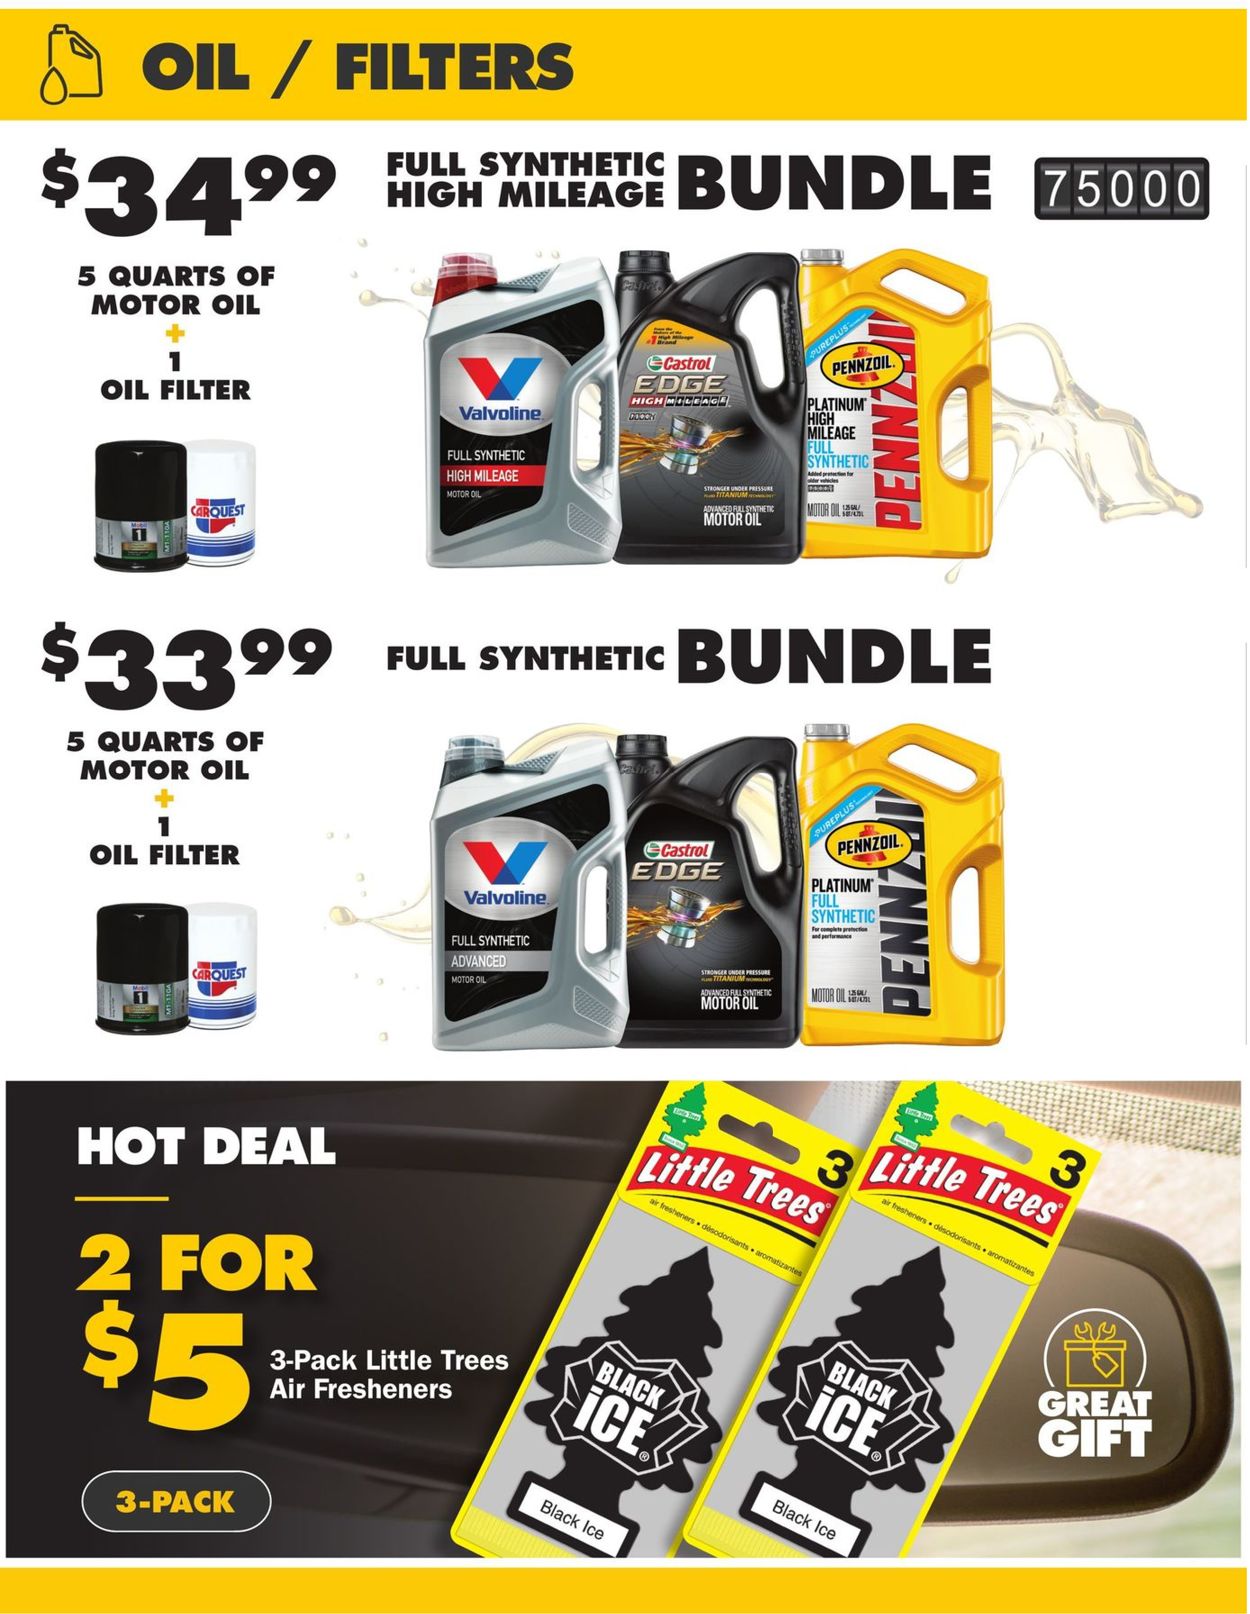 carquest-current-weekly-ad-10-29-12-30-2020-2-frequent-ads